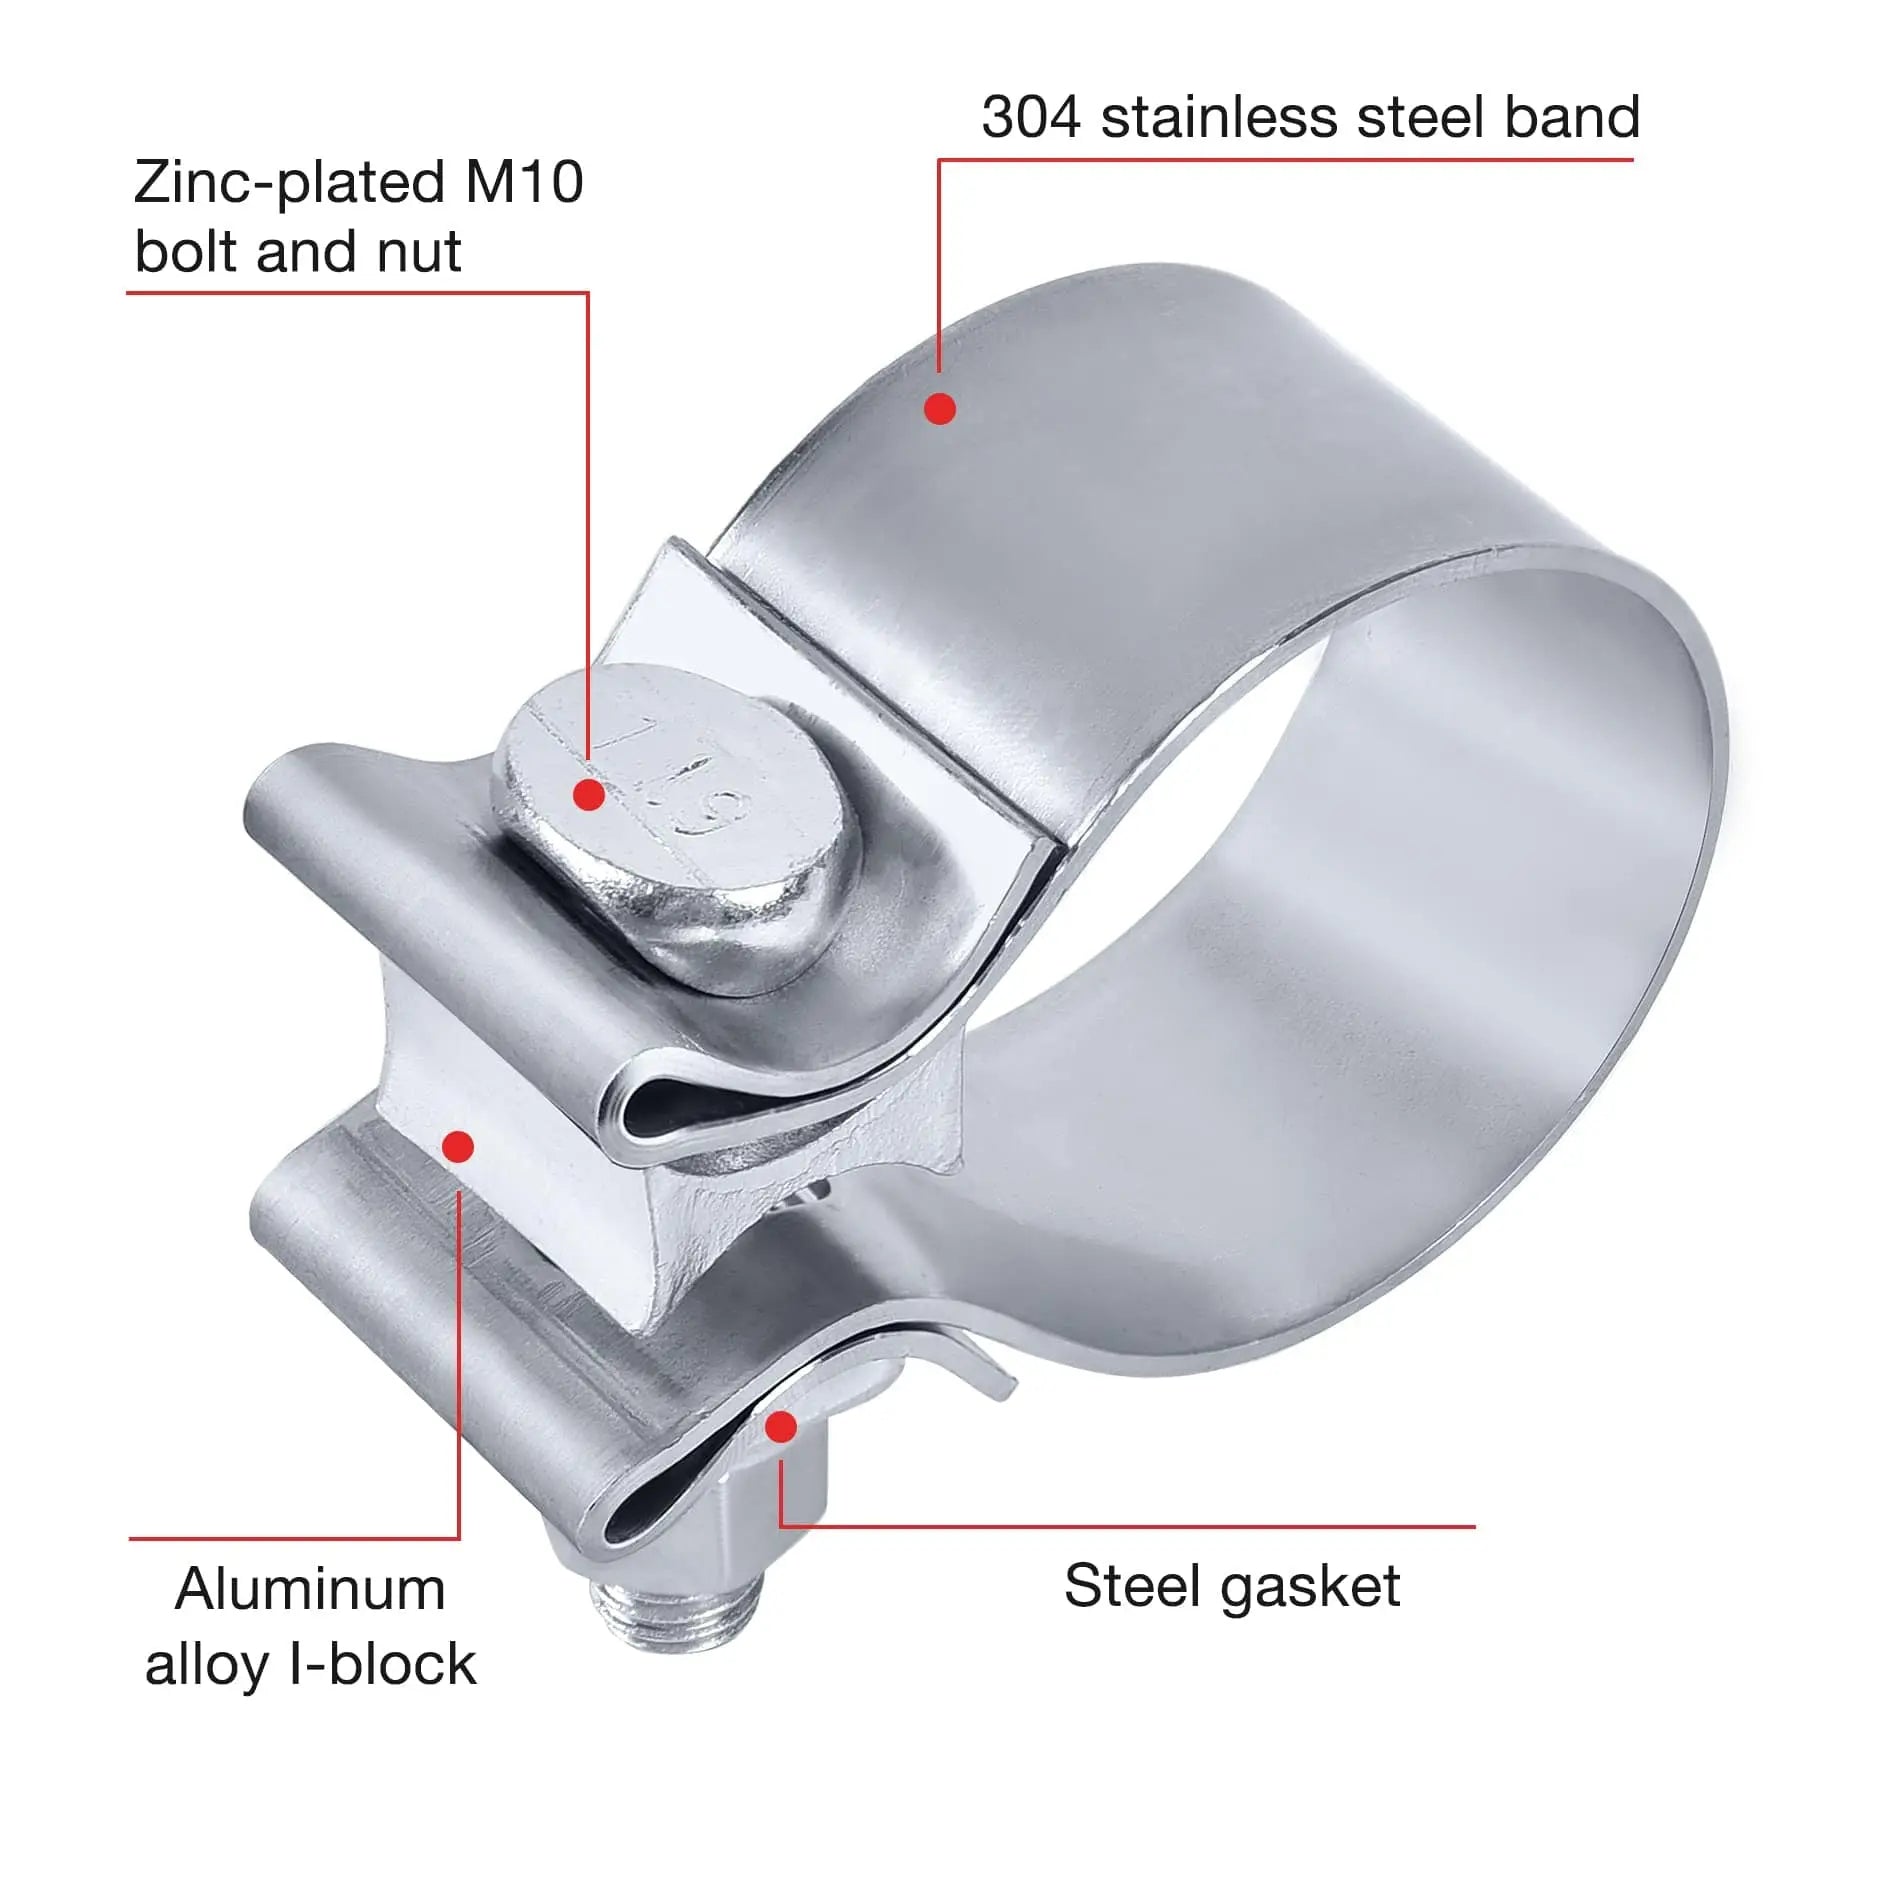 EVIL ENERGY Narrow Band Exhaust Clamp Muffler Clamp Stainless  Steel（1.75/2.0/2.25/2.5/3.0 Inch ）